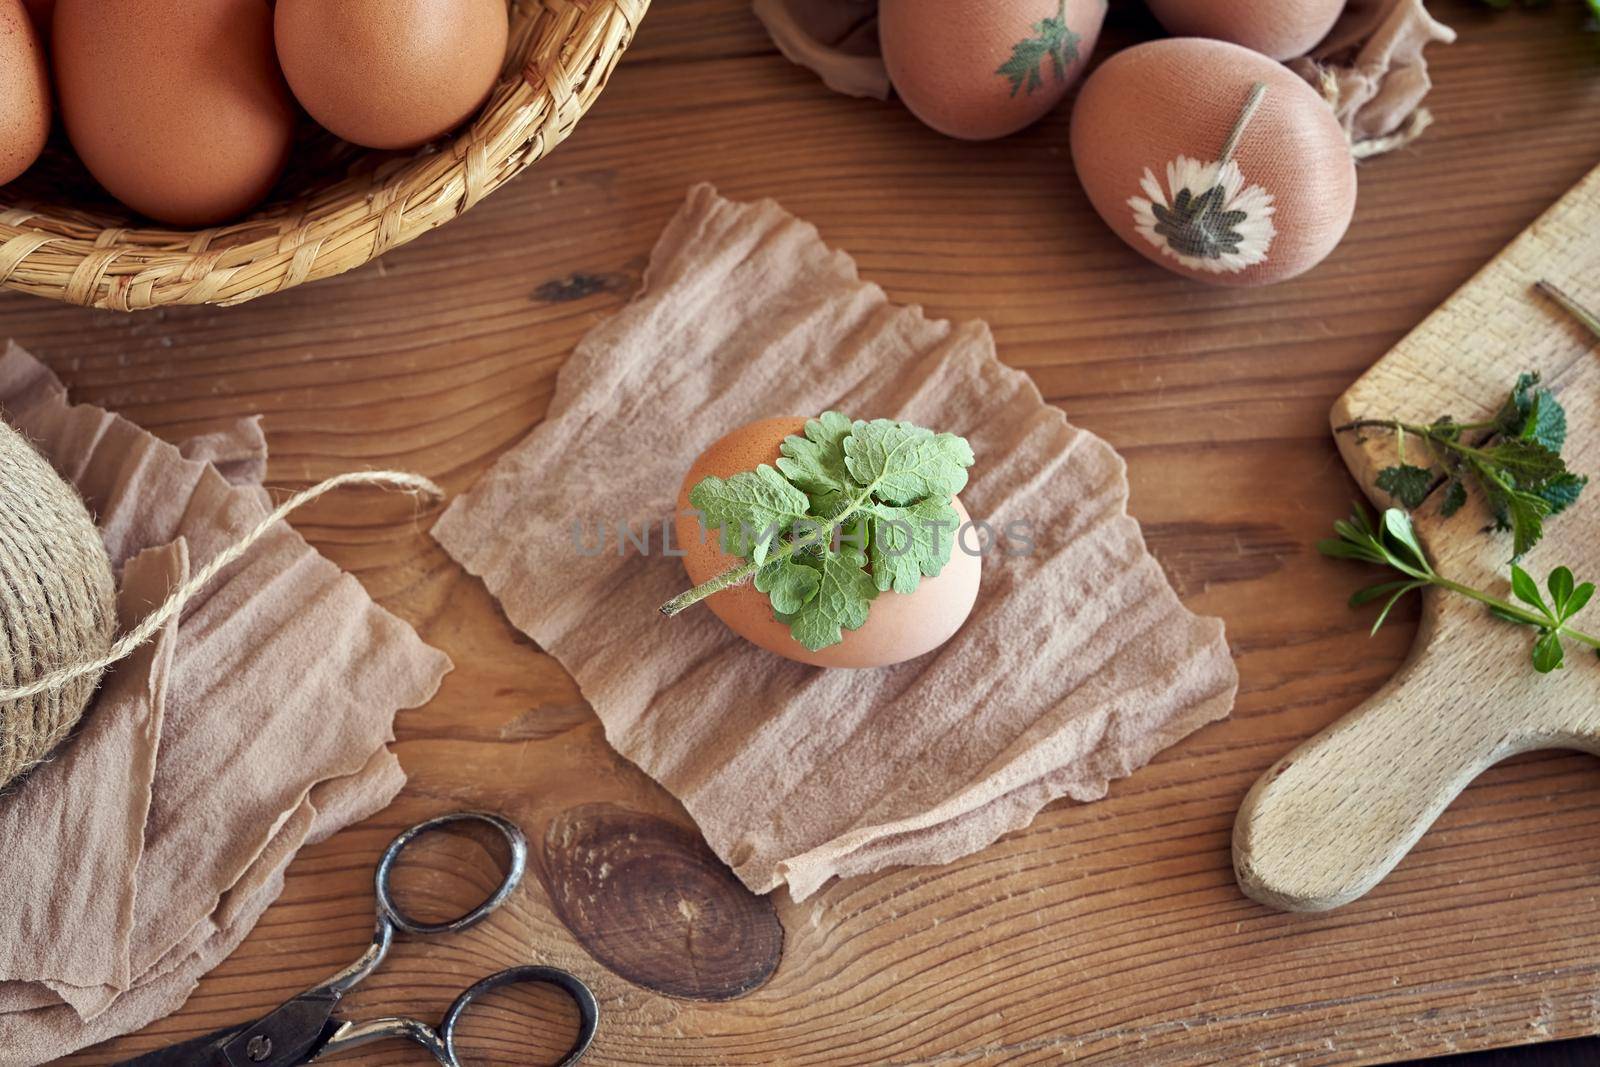 Preparation of Easter eggs for dying with onion peels with a pattern of fresh herbs